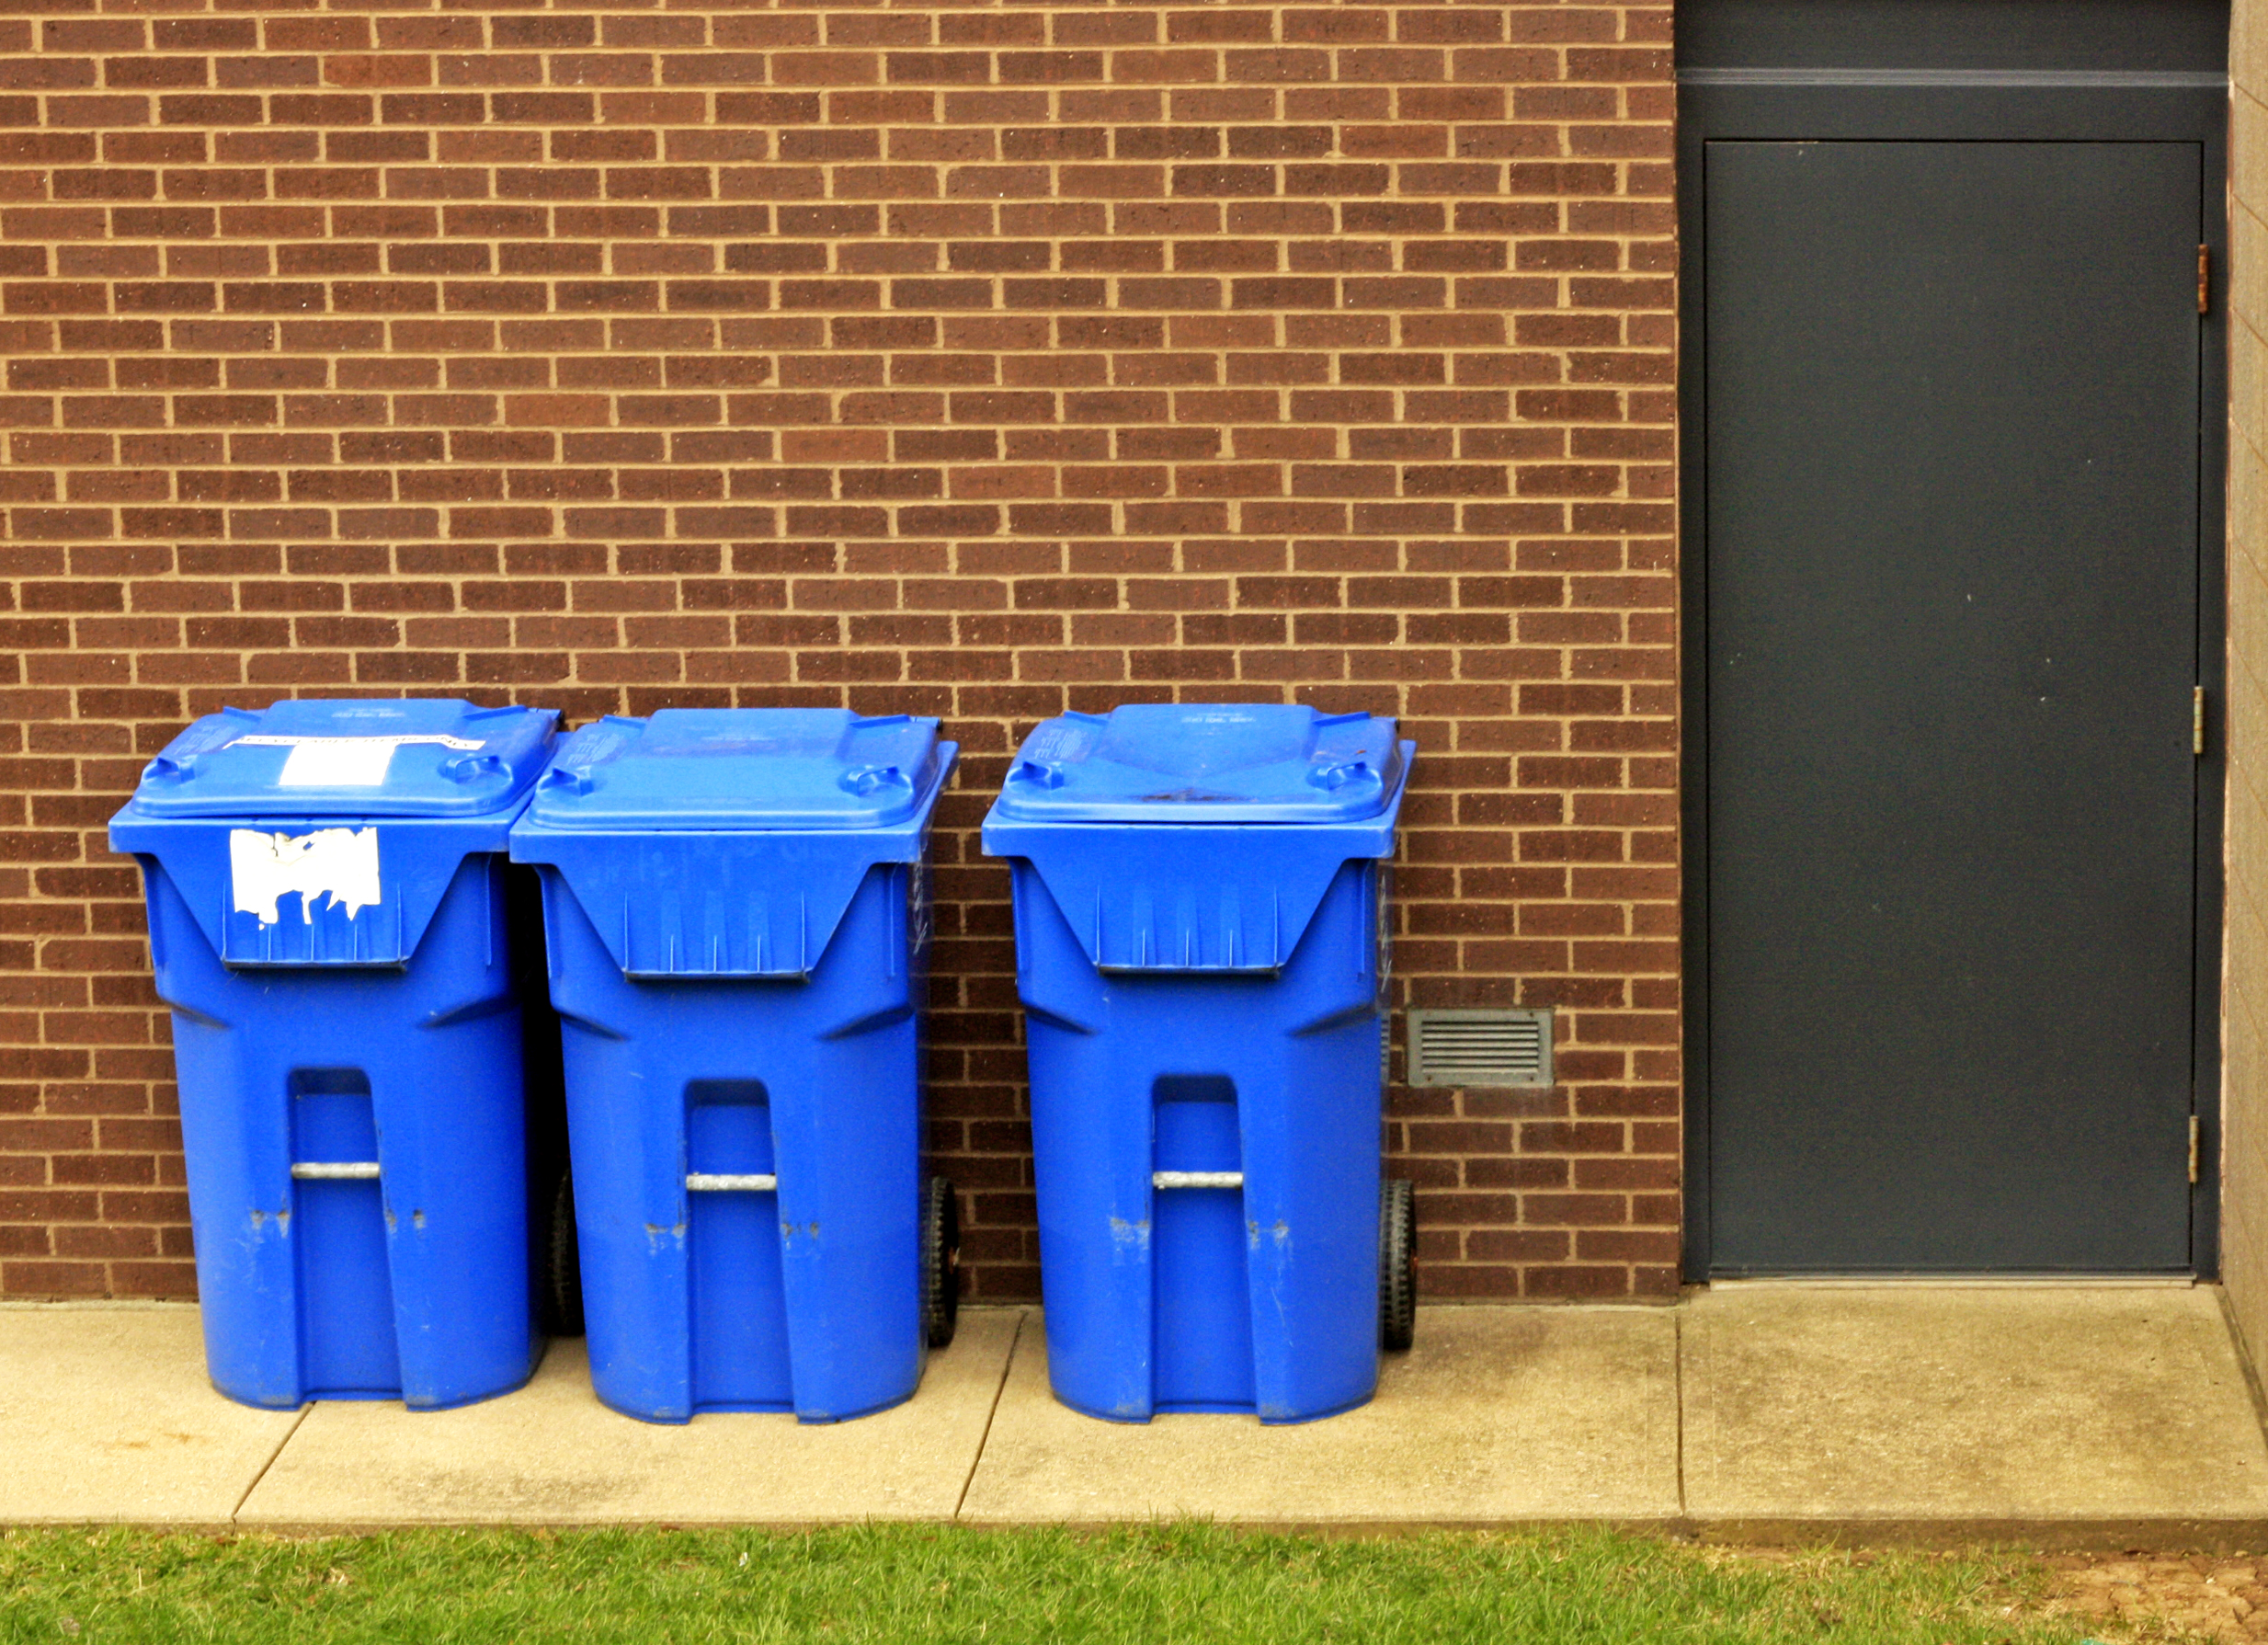 Recycling cans. (Credit: Linus/Flickr)